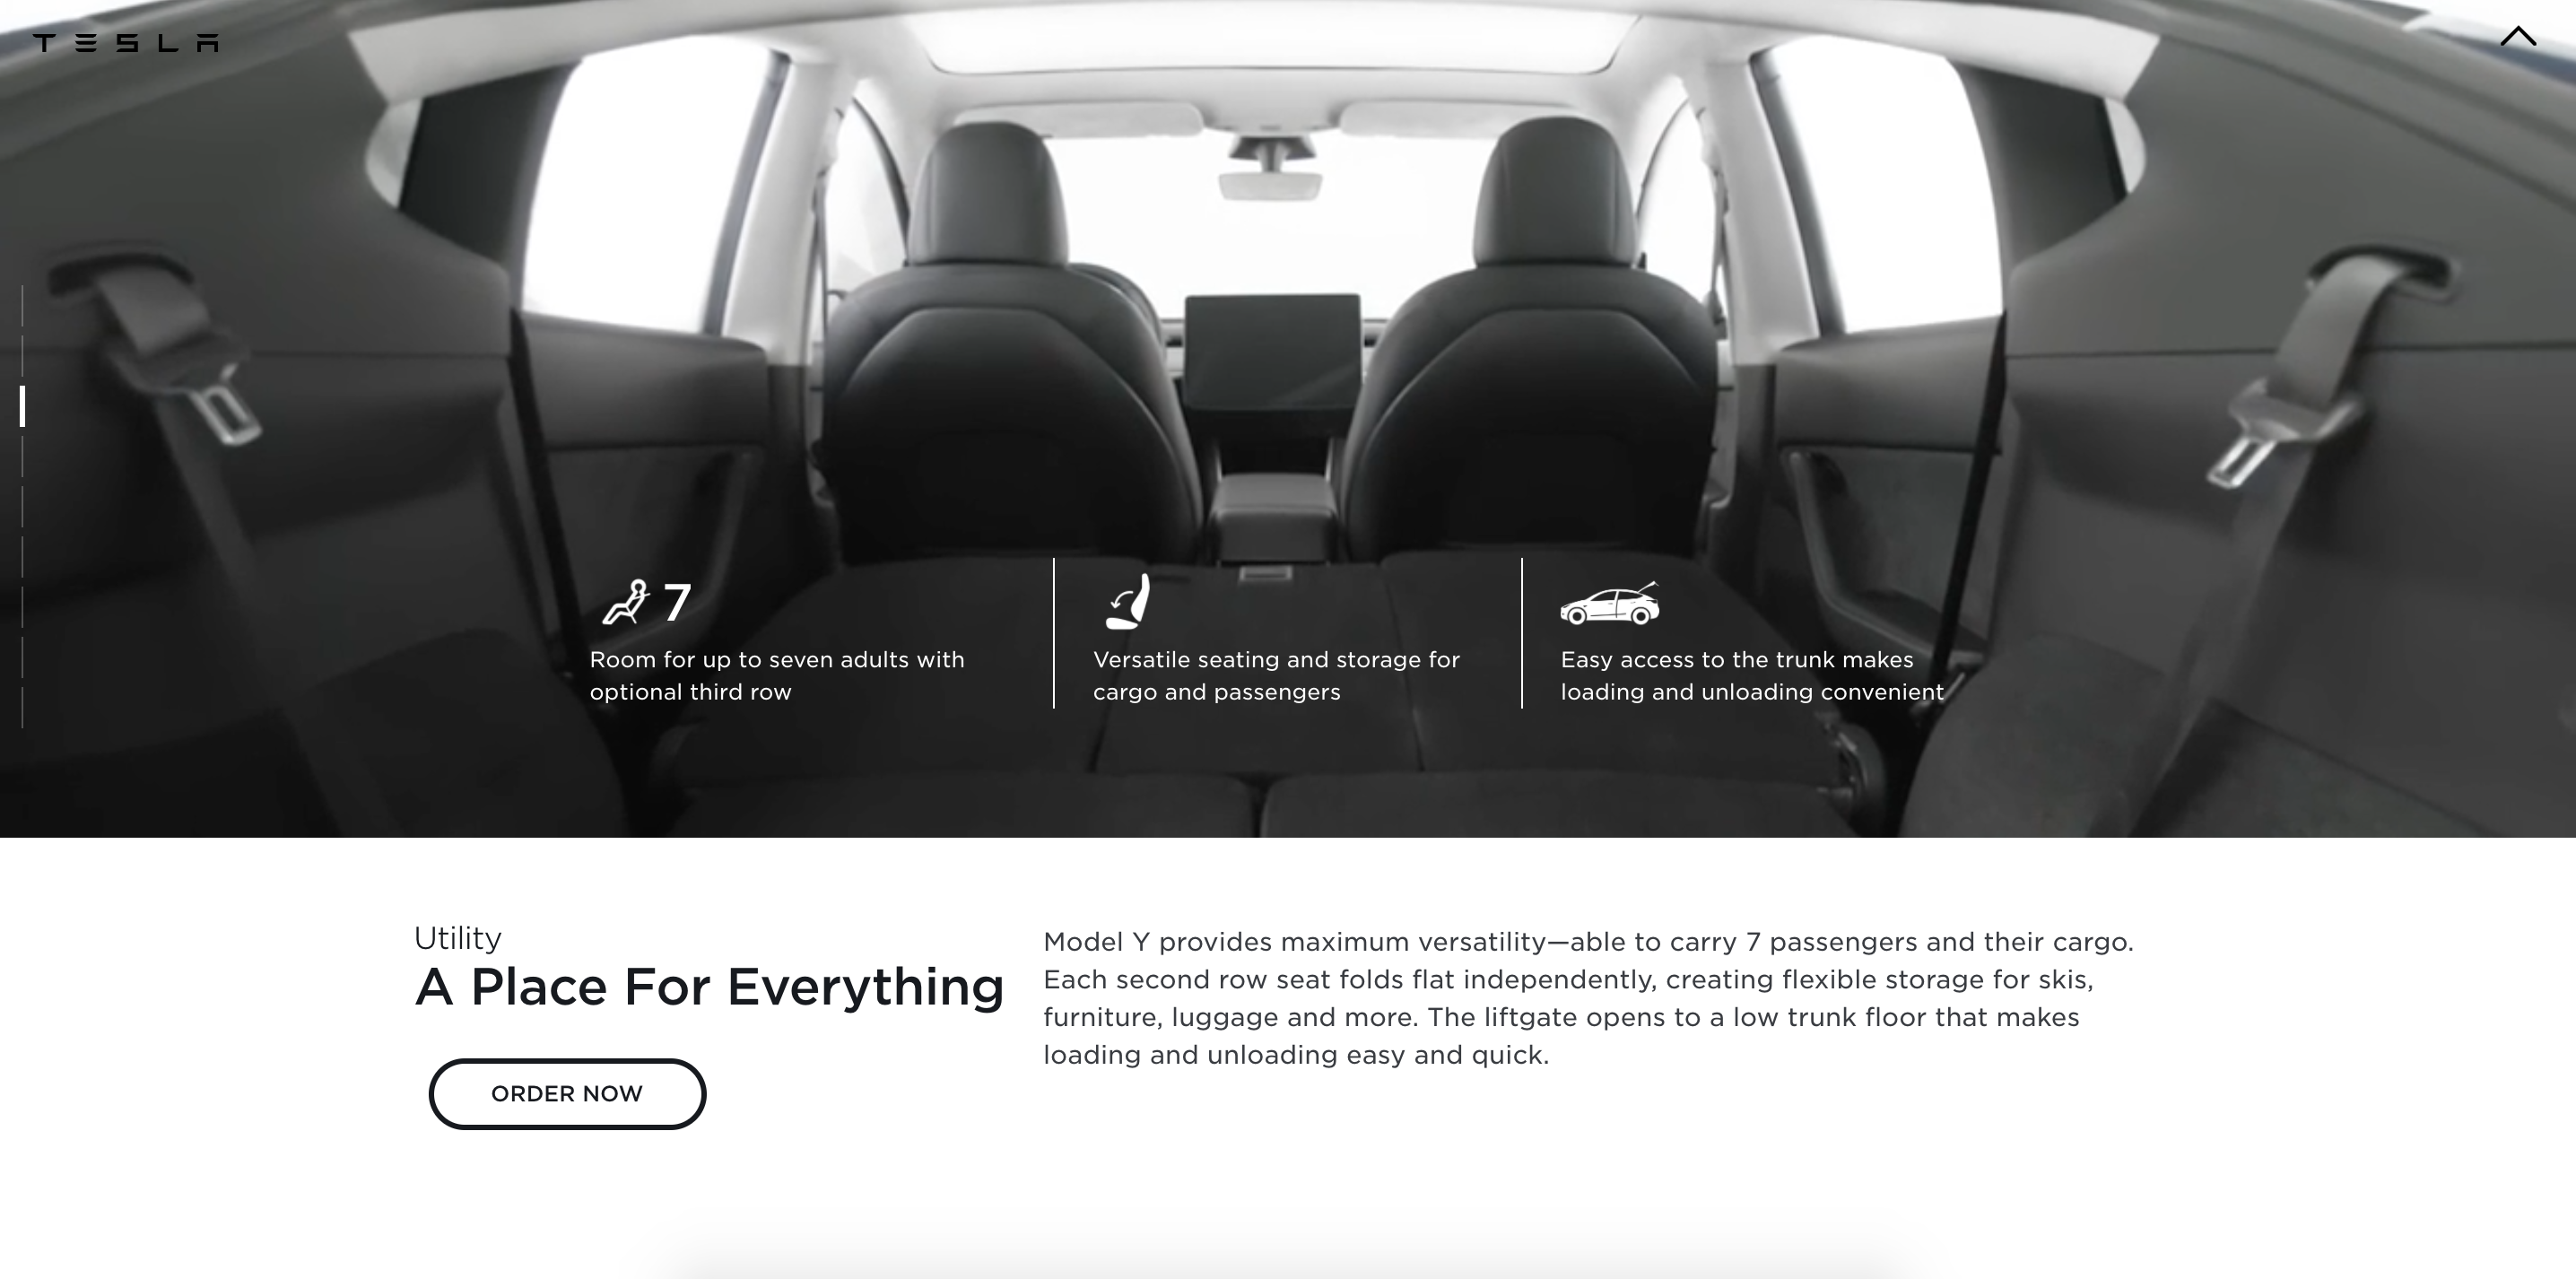 Tesla Model Y product page after showing third row